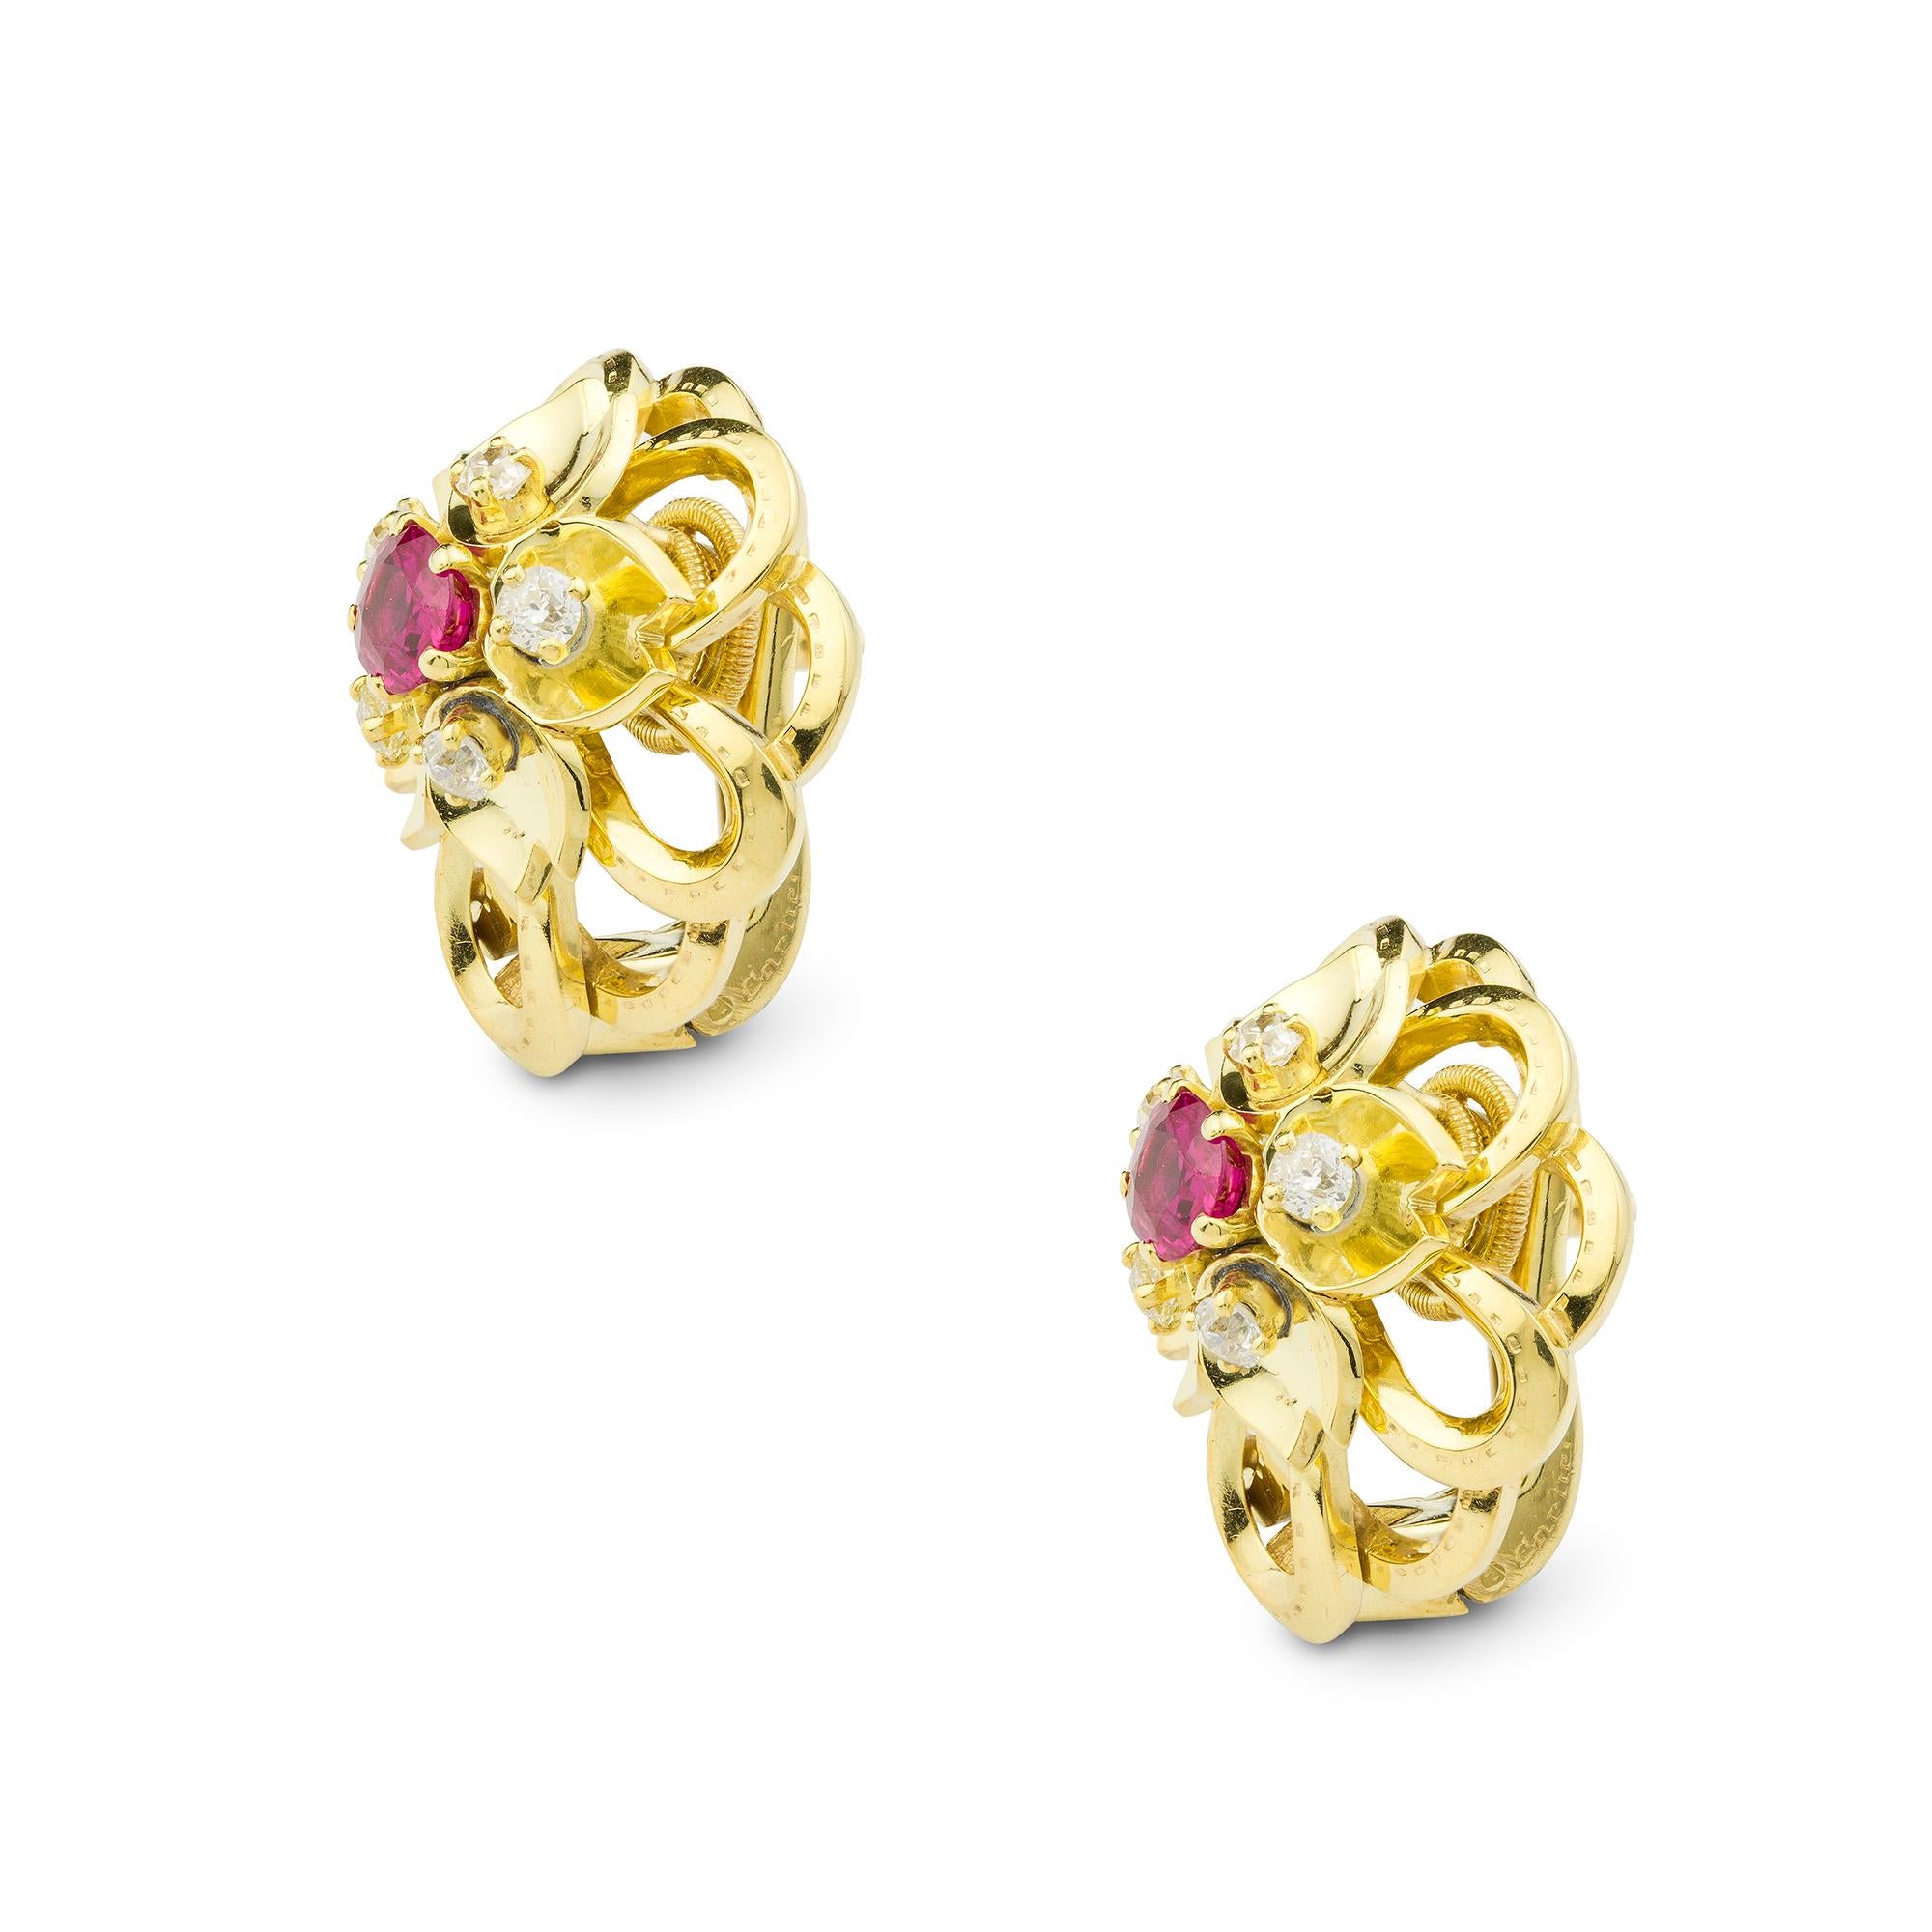 A pair of Cartier ruby and diamond flower earrings, centred with an oval-cut ruby estimated to weigh 1.20cts the pair surrounded by five brilliant-cut diamonds estimated weight 0.40cts the pair set in gold petals to gold openwork design, gross